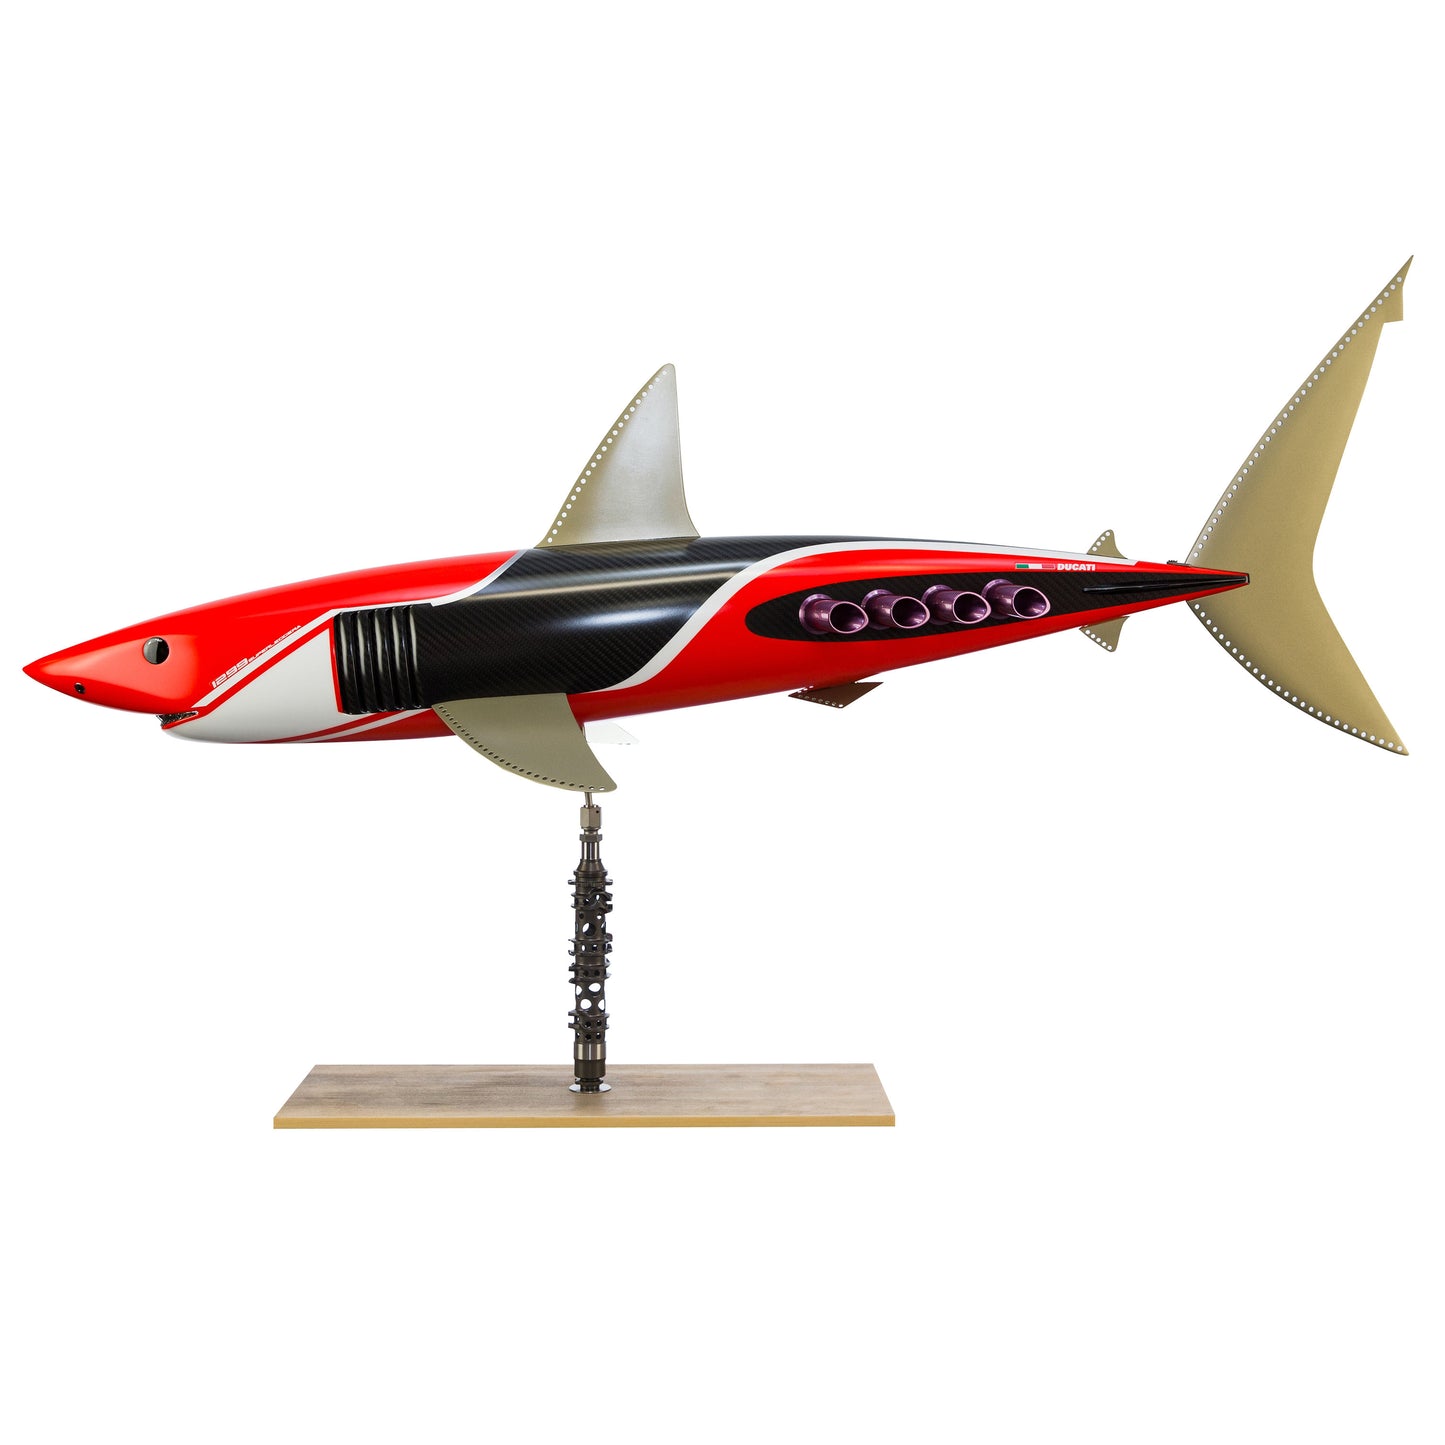 Carbon fibre shark with Ducati livery on a F1 plank base with F1 part